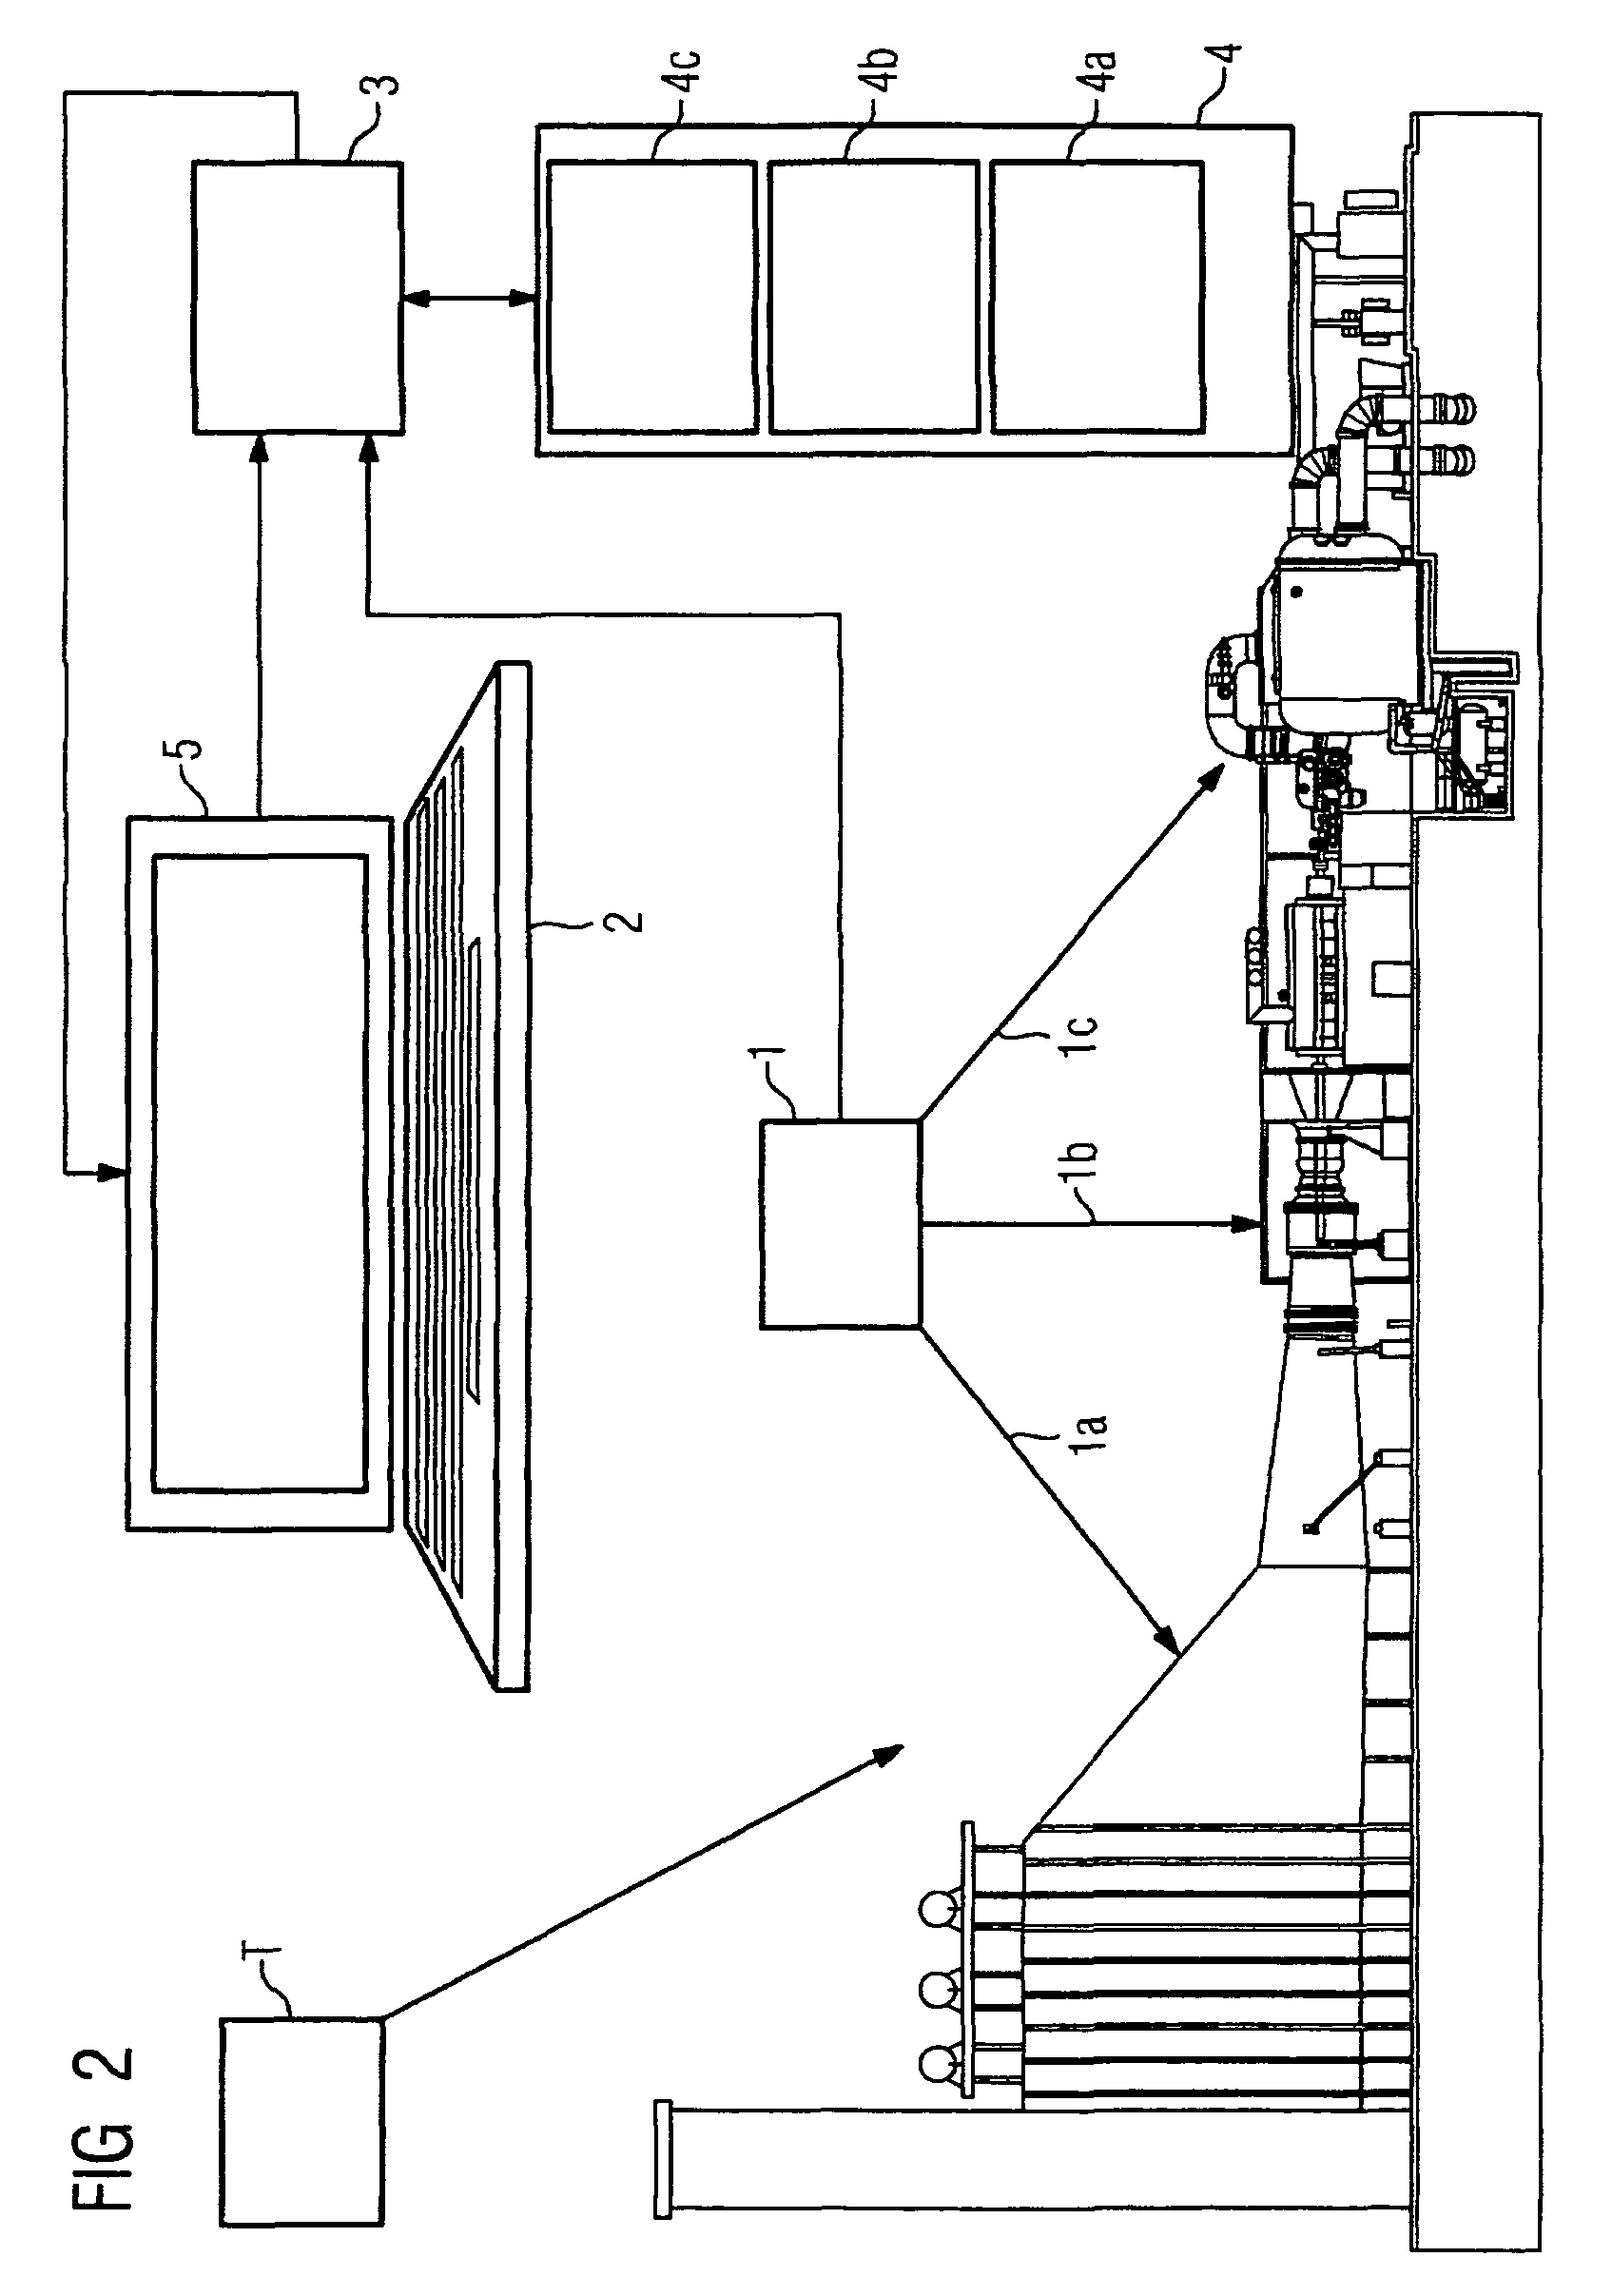 Method and apparatus for determination of the life consumption of individual components in a fossil fuelled power generating installation, in particular in a gas and steam turbine installation